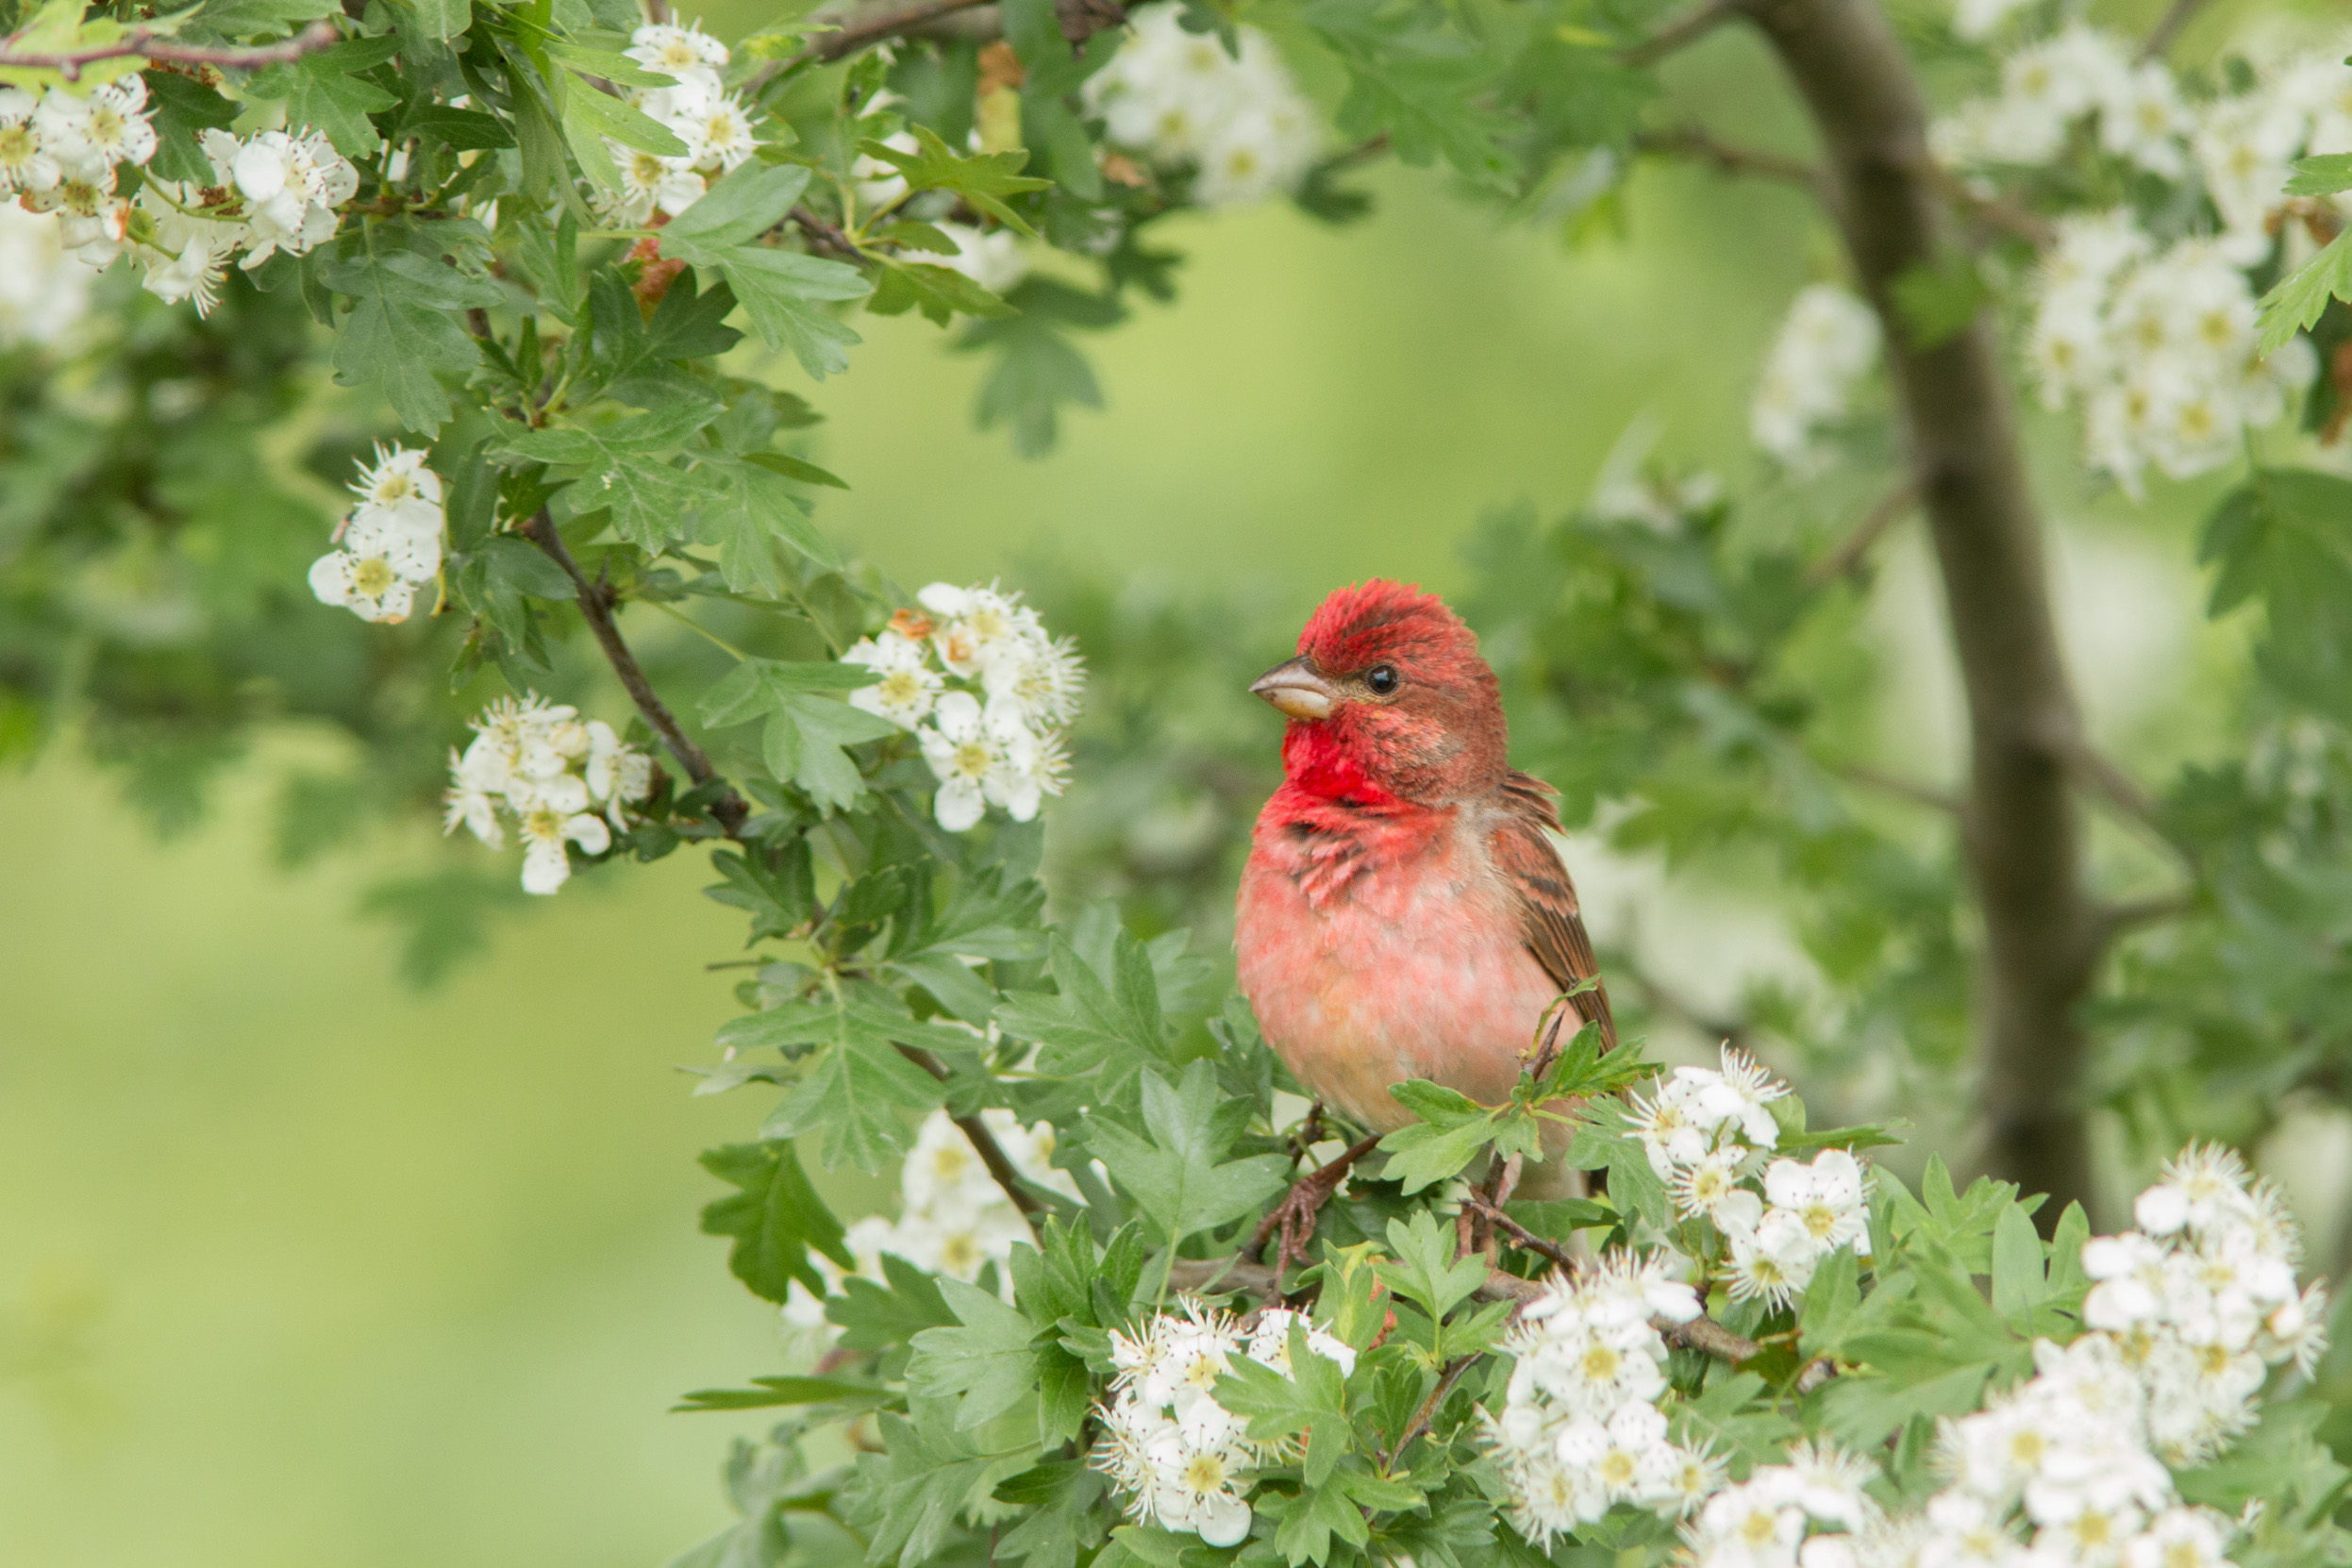 A Common Rosefinch perched on a branch surrounded by white flowers.